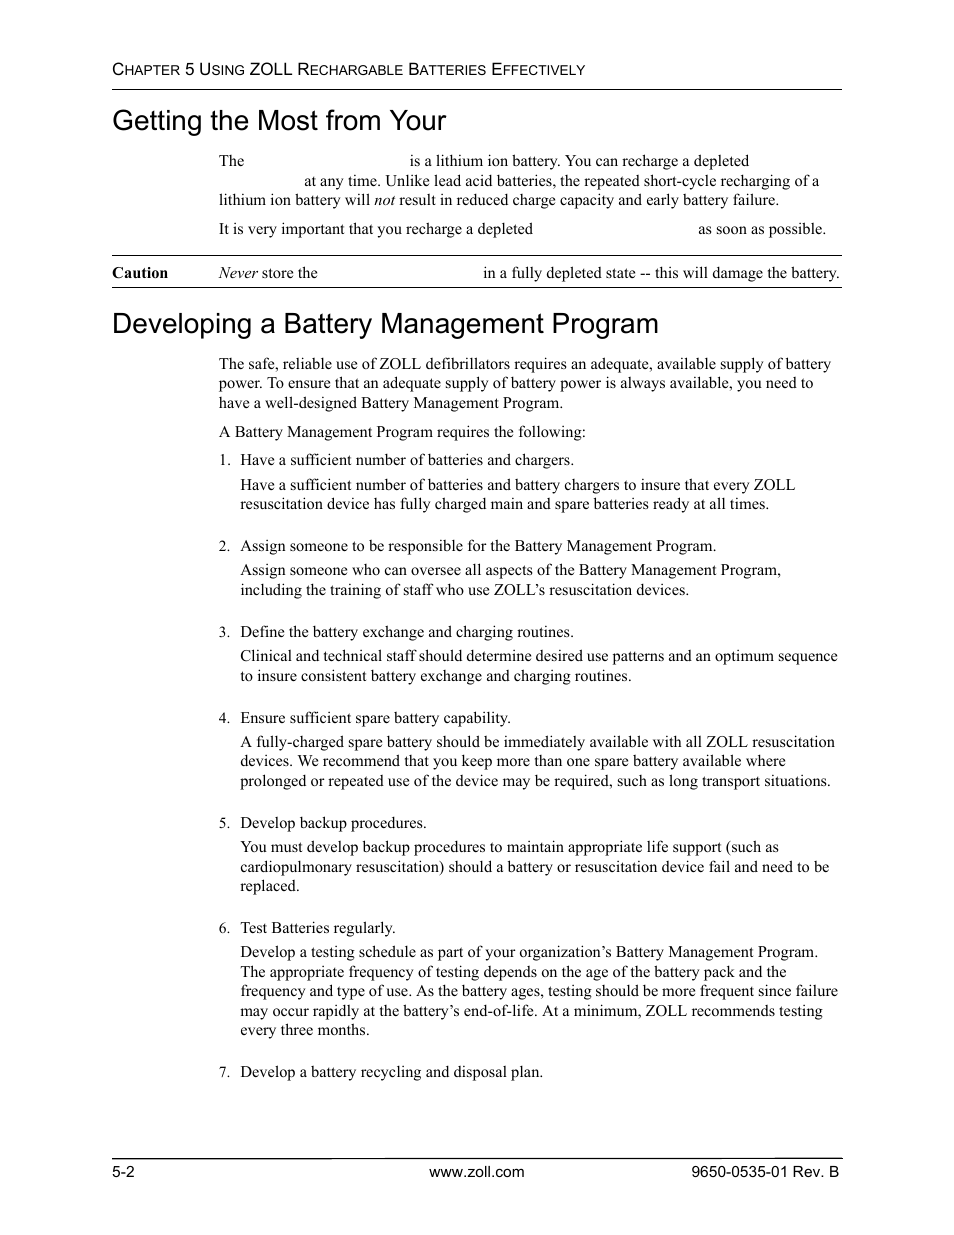 Getting the most from your surepower battery pack, Developing a battery management program | ZOLL SurePower Rev B Charger Station User Manual | Page 36 / 44